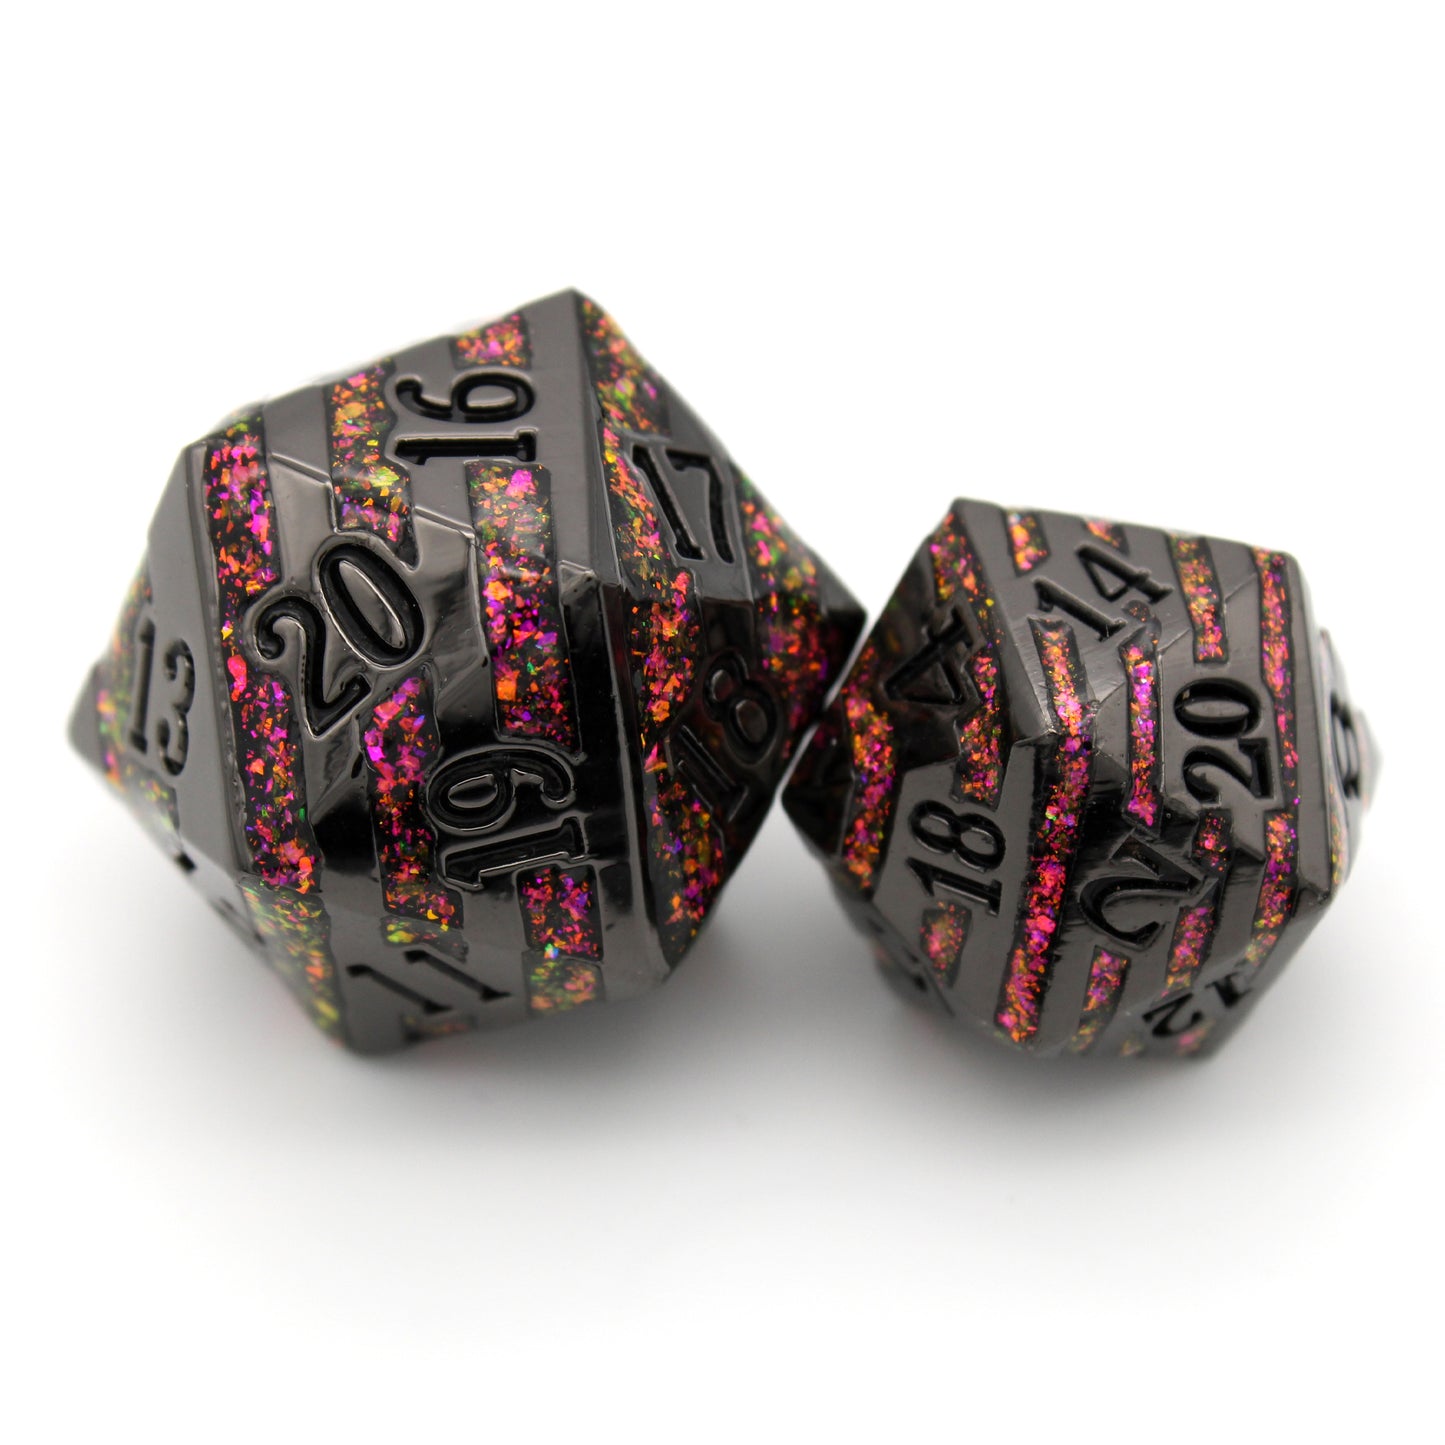 Each Spindown Life Counter measures in at a whopping 25mm, crafted from shiny black zinc and banded with glittery enamel. They are part of the Cyberpunk collection, sister to our Steampunk collection.